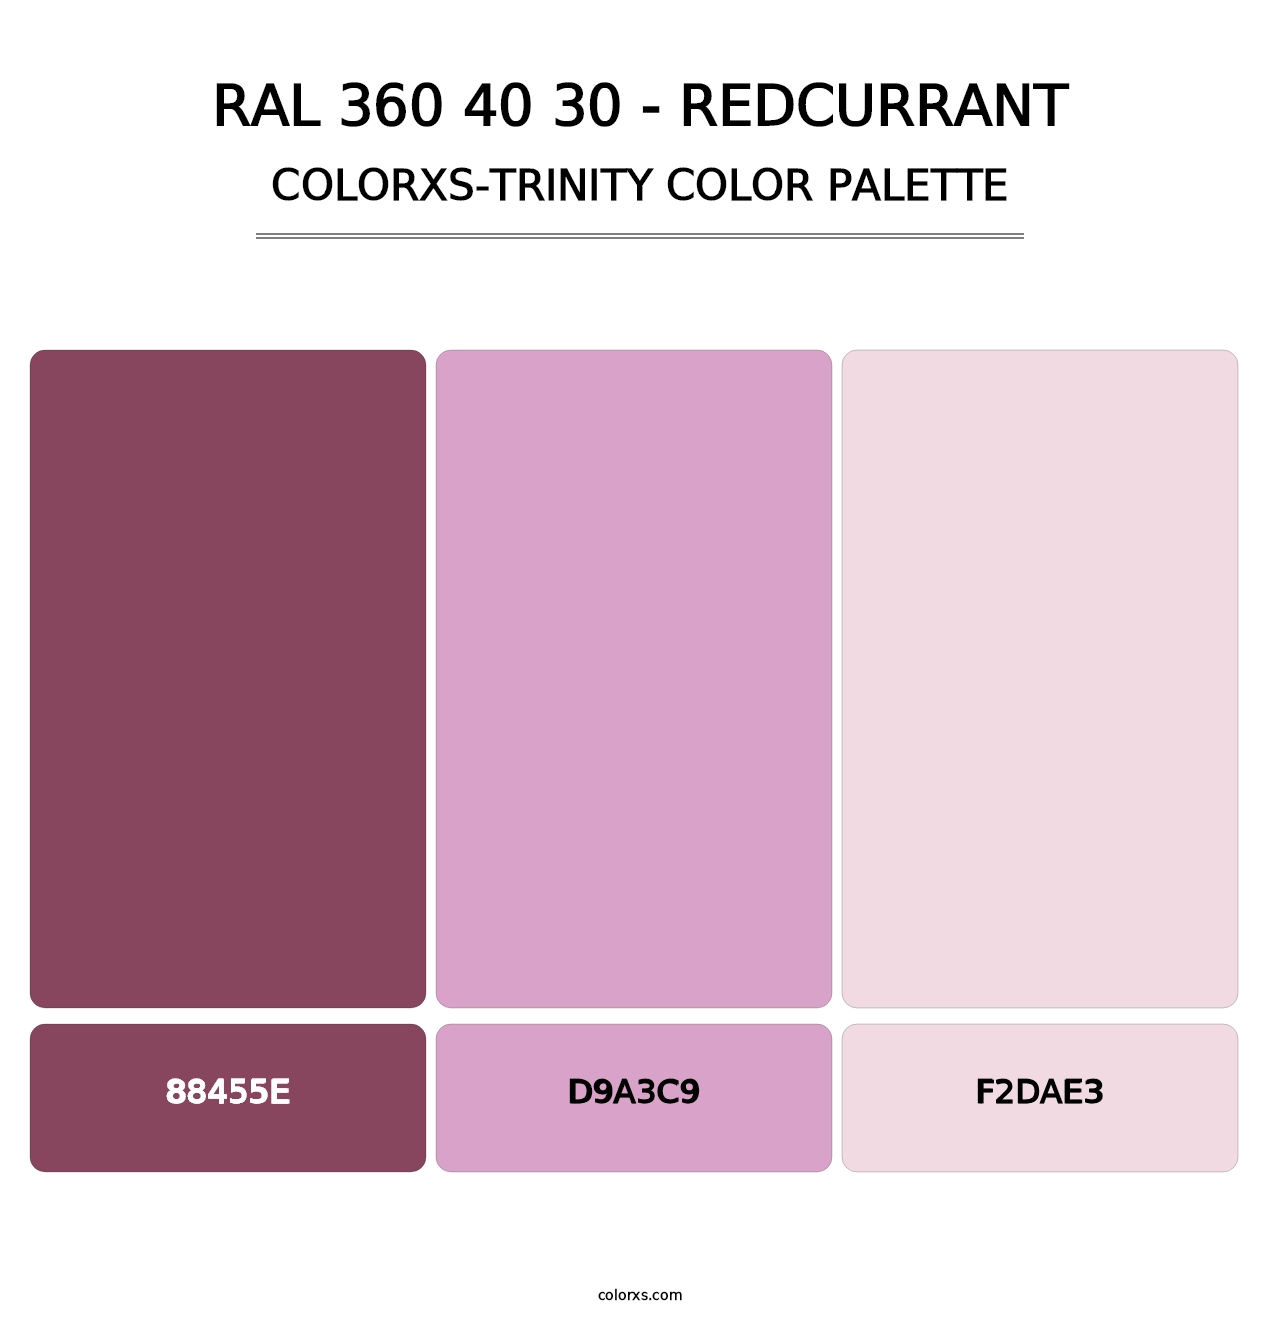 RAL 360 40 30 - Redcurrant - Colorxs Trinity Palette